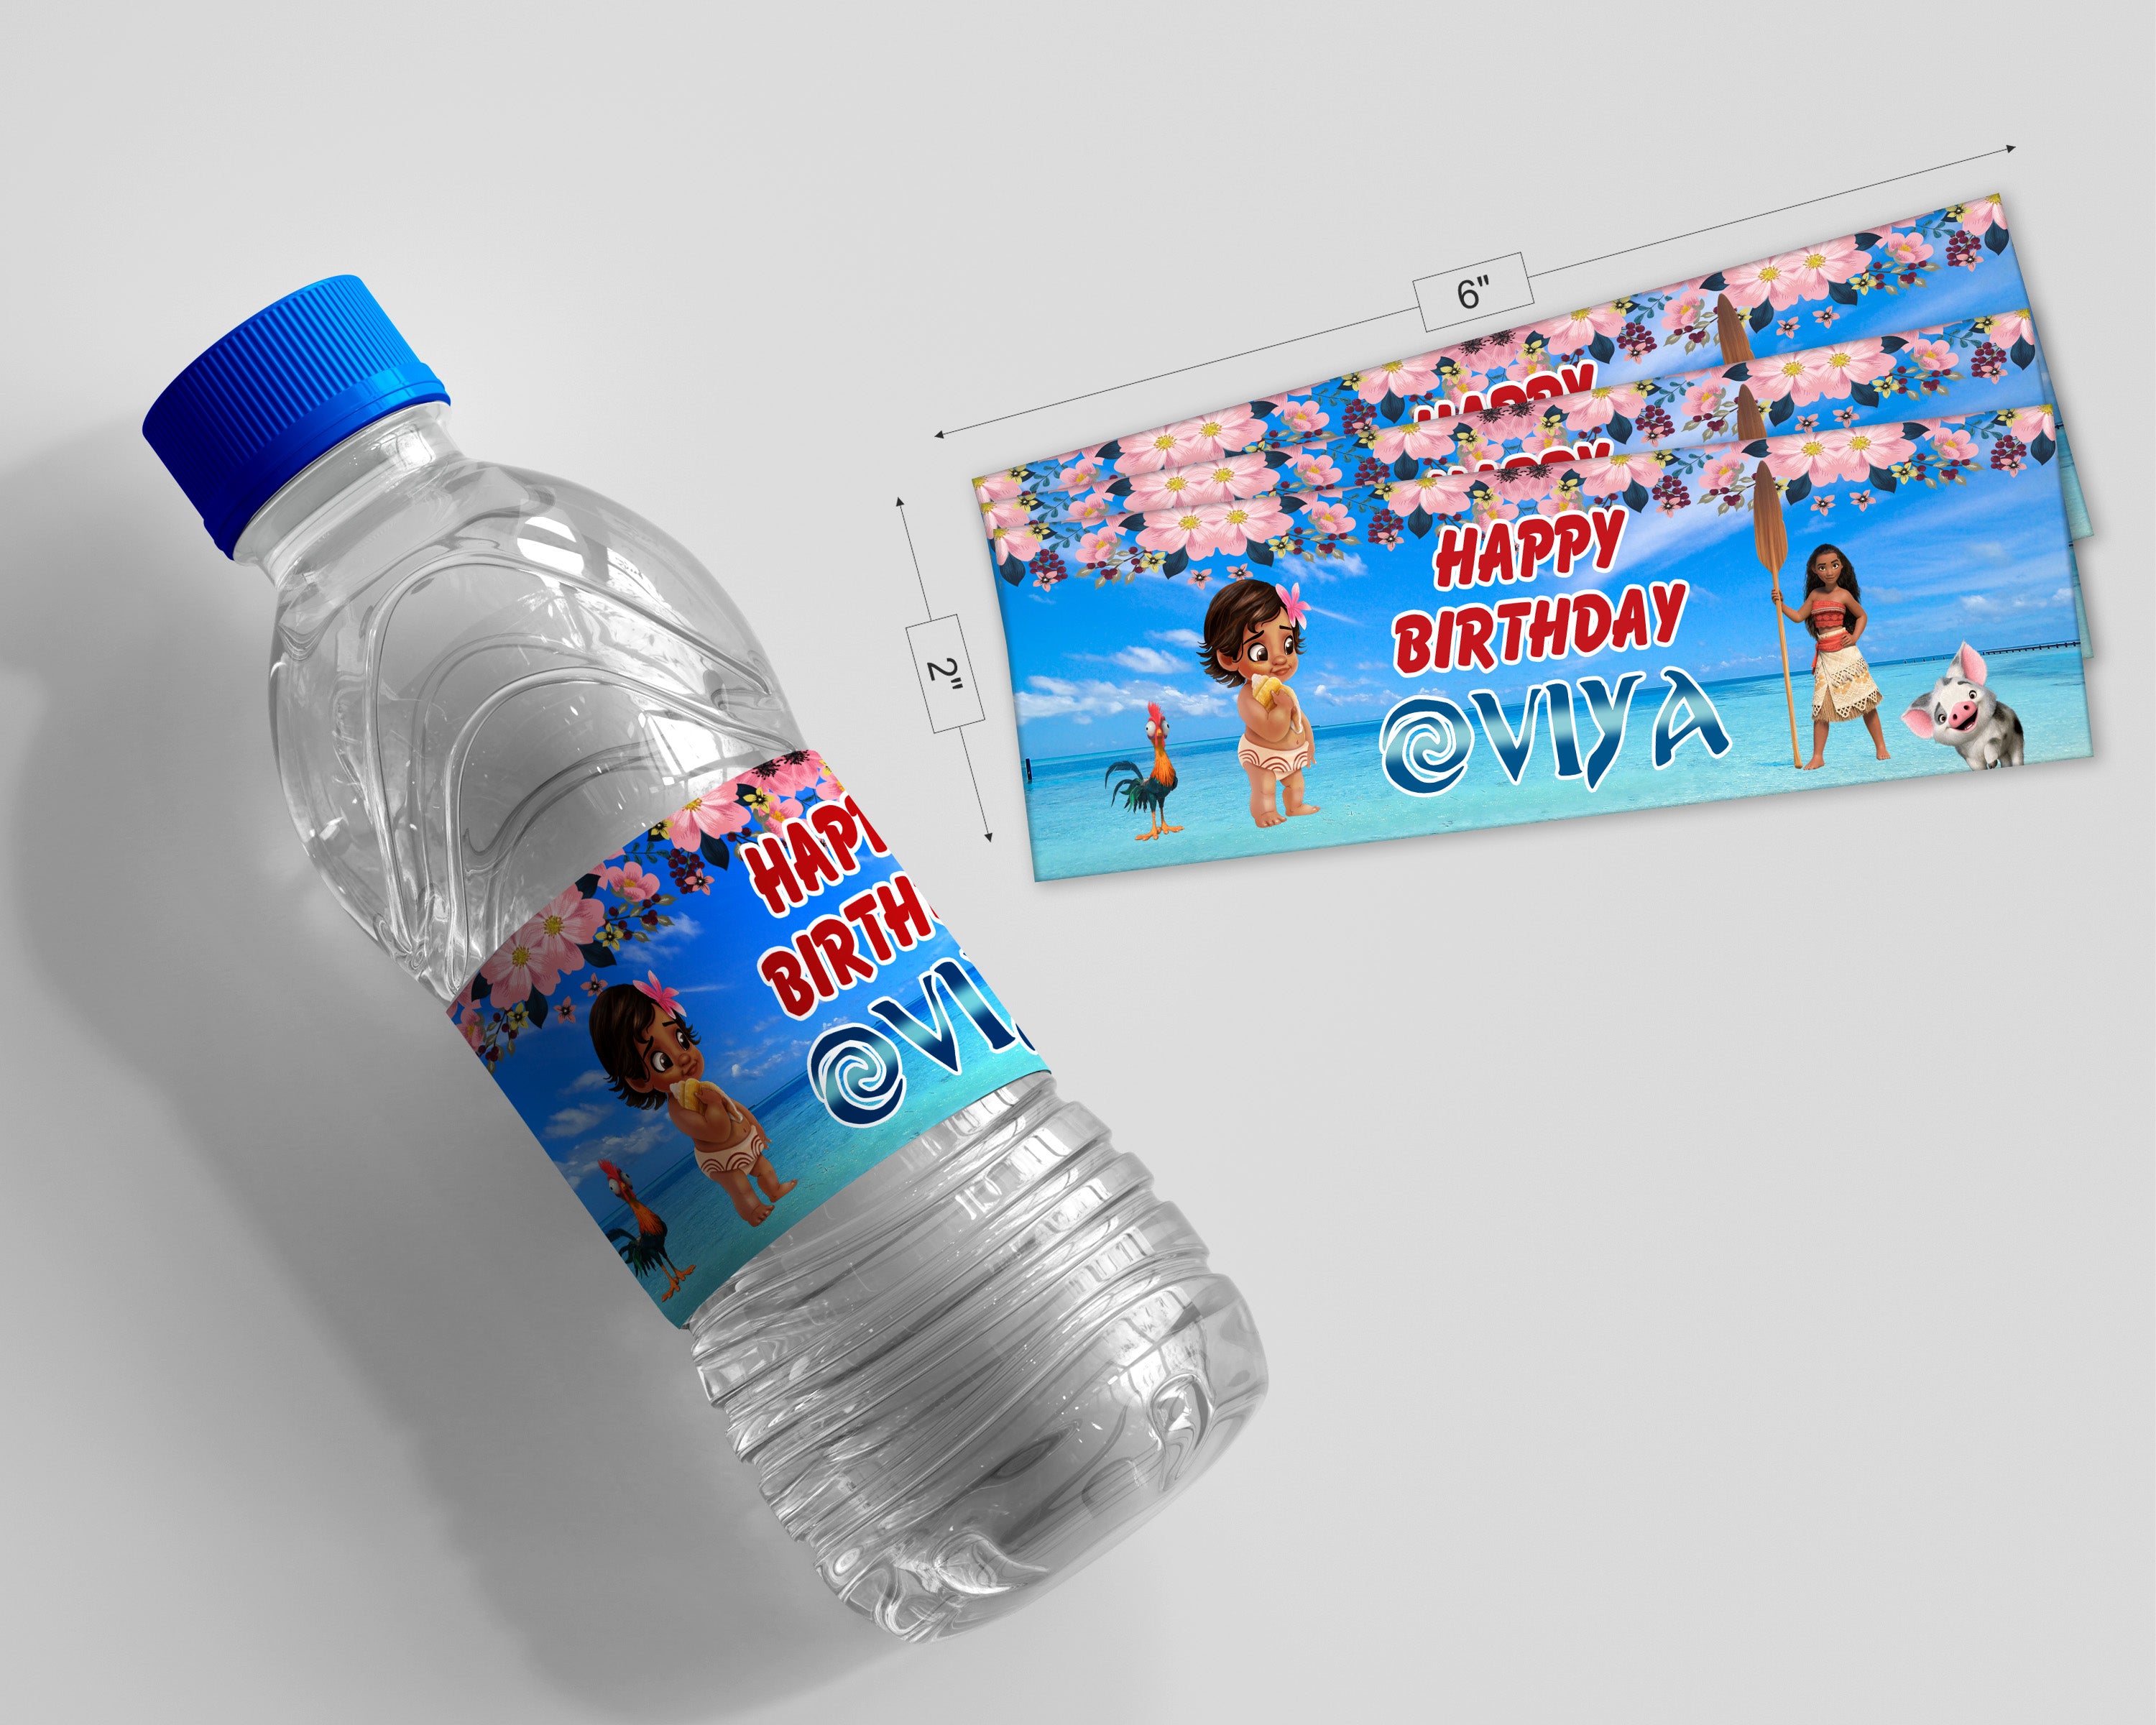 PSI Military Theme Water Bottle Stickers  Personalized party online –  Party Supplies India